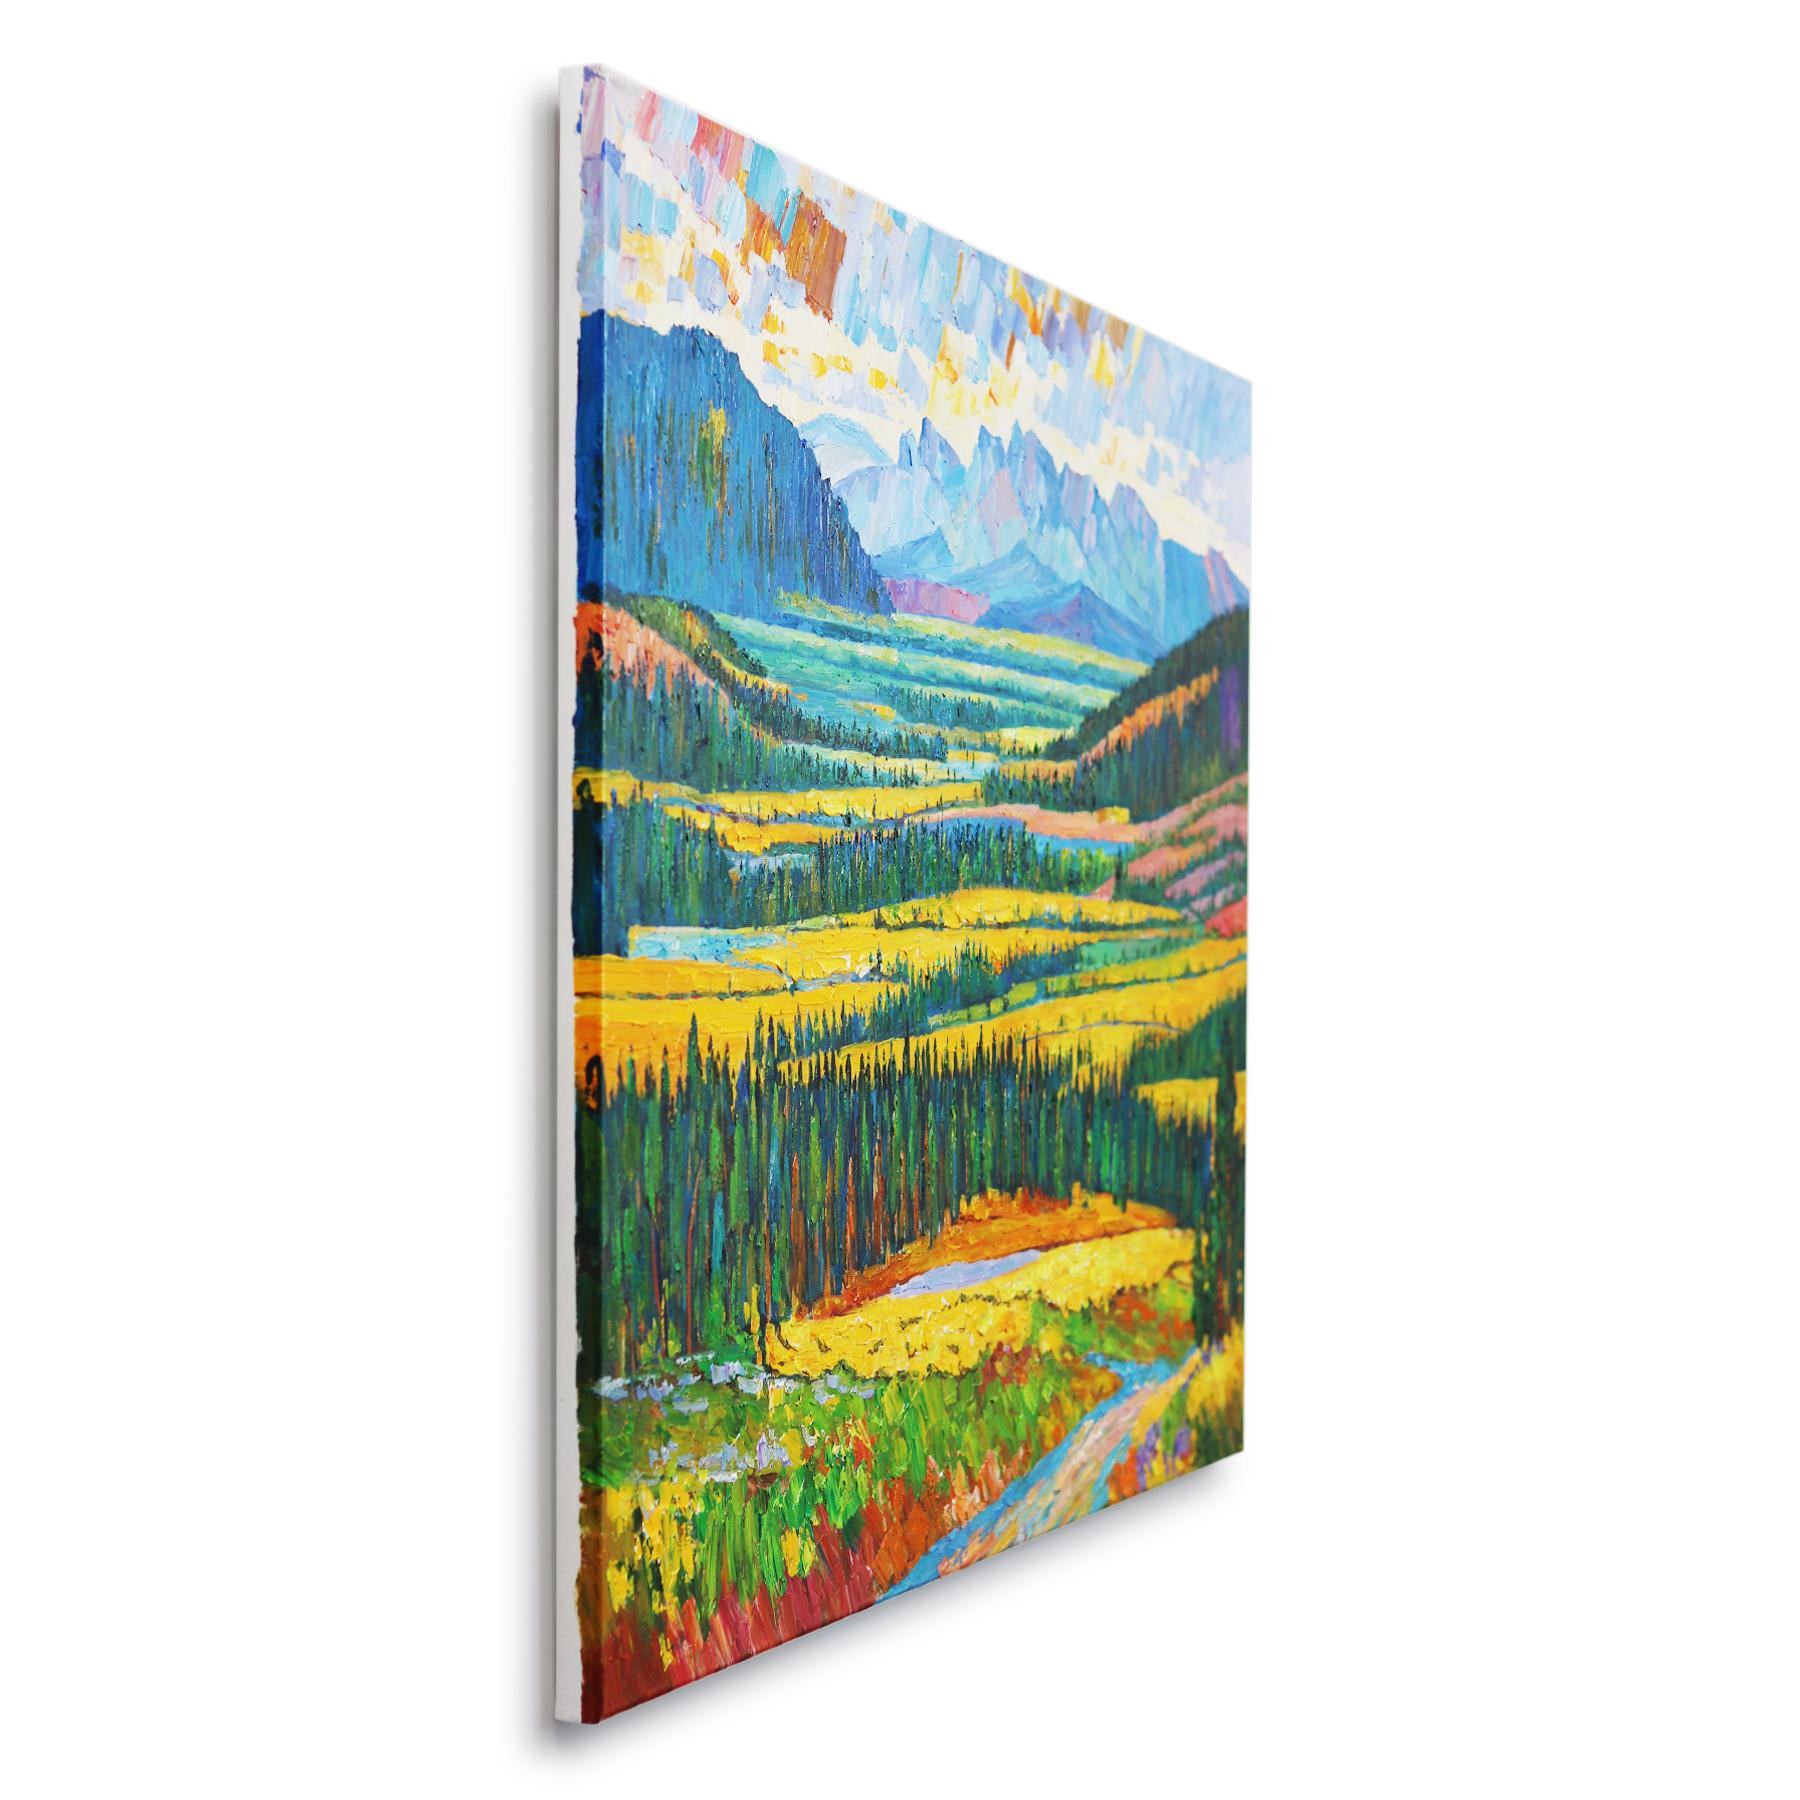 Over the Valley and Mountain - Impressionist Landscape Vibrant Painting For Sale 2